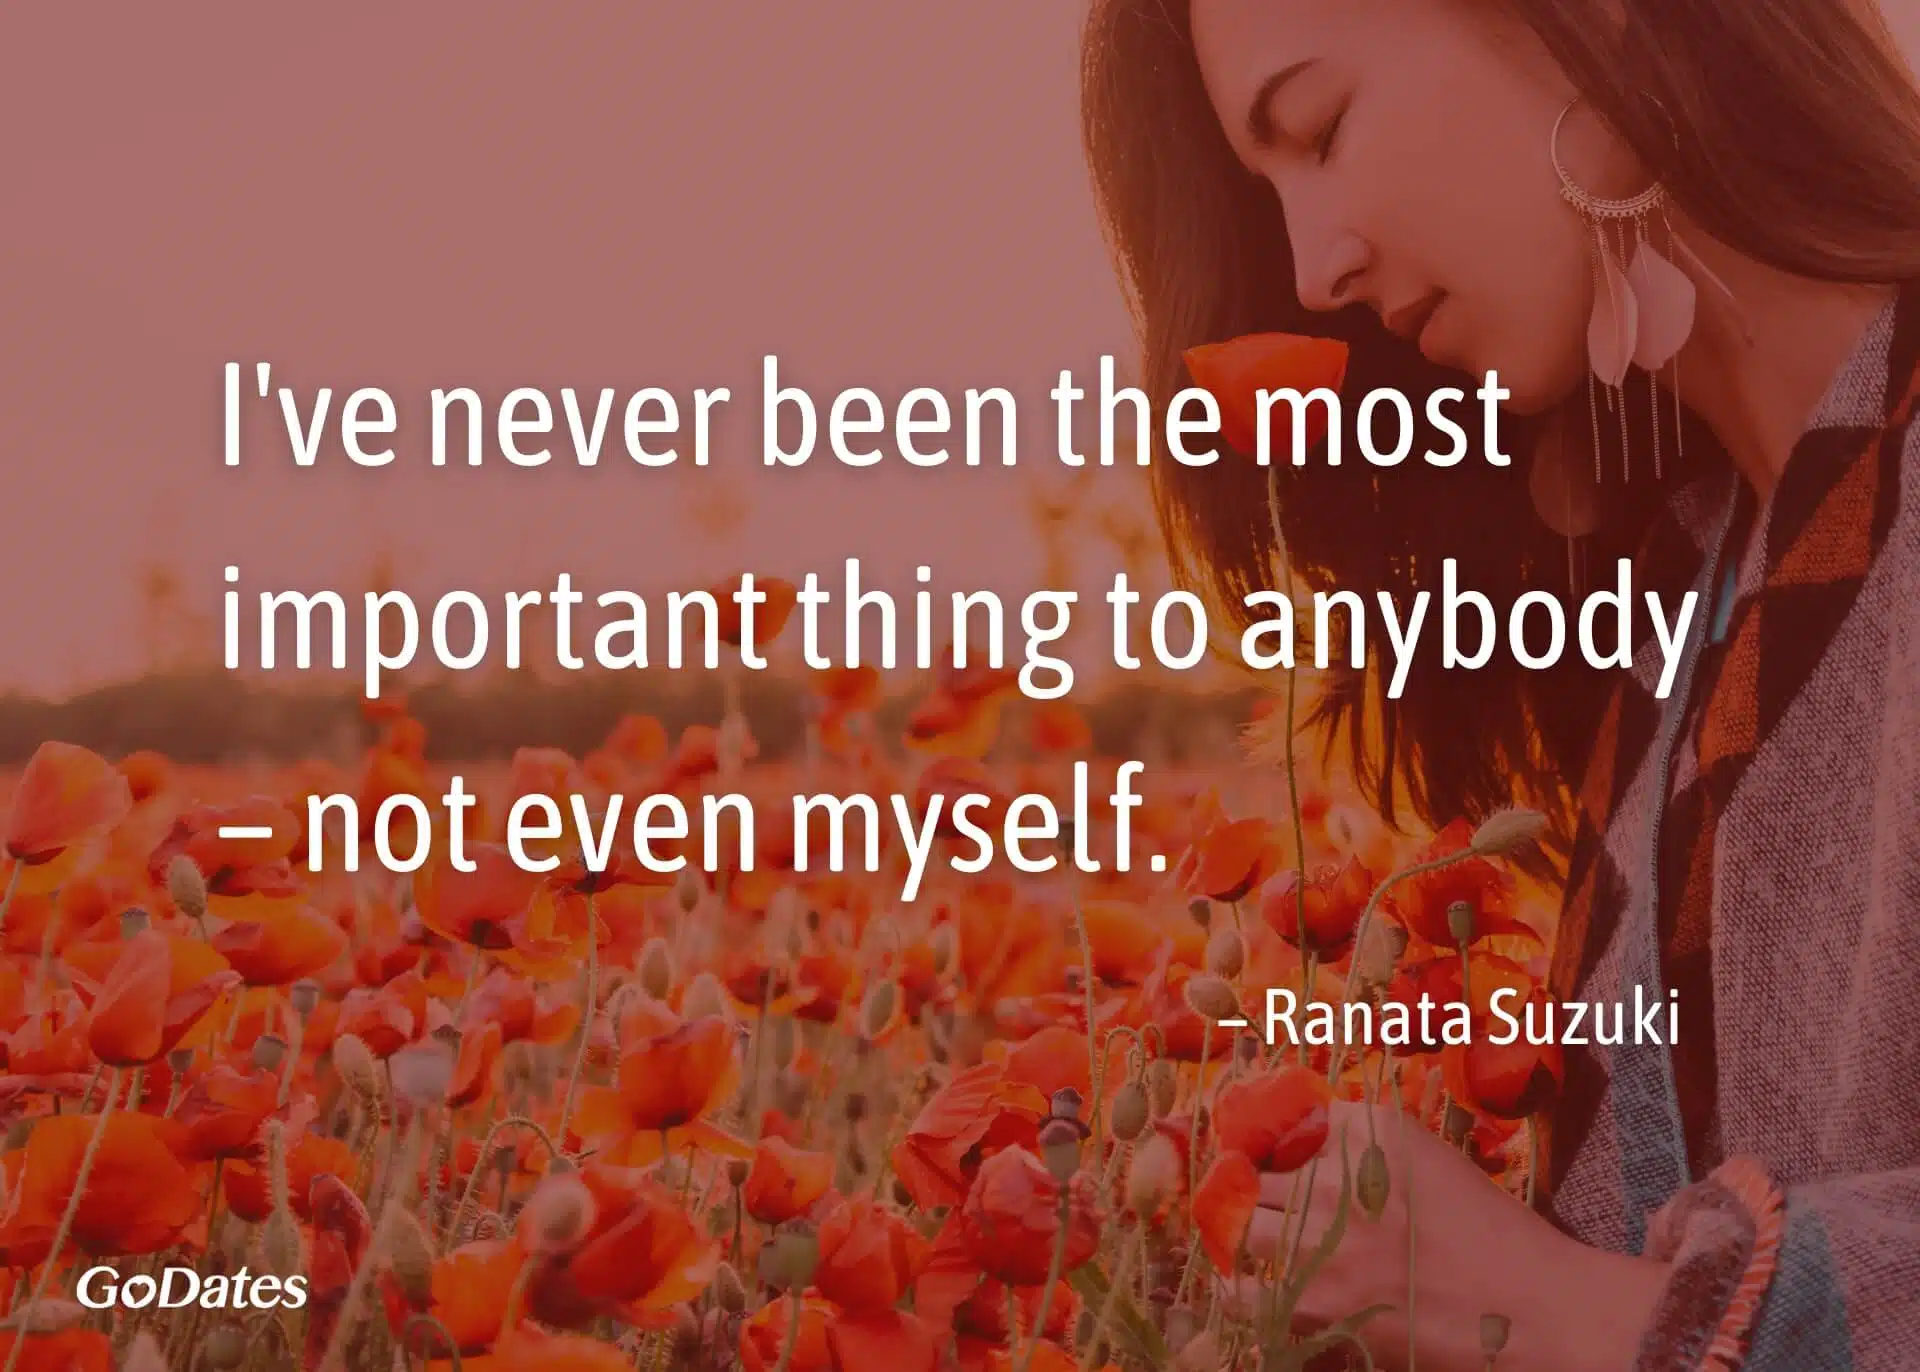 I loved you but you never loved me quotes not important to anybody